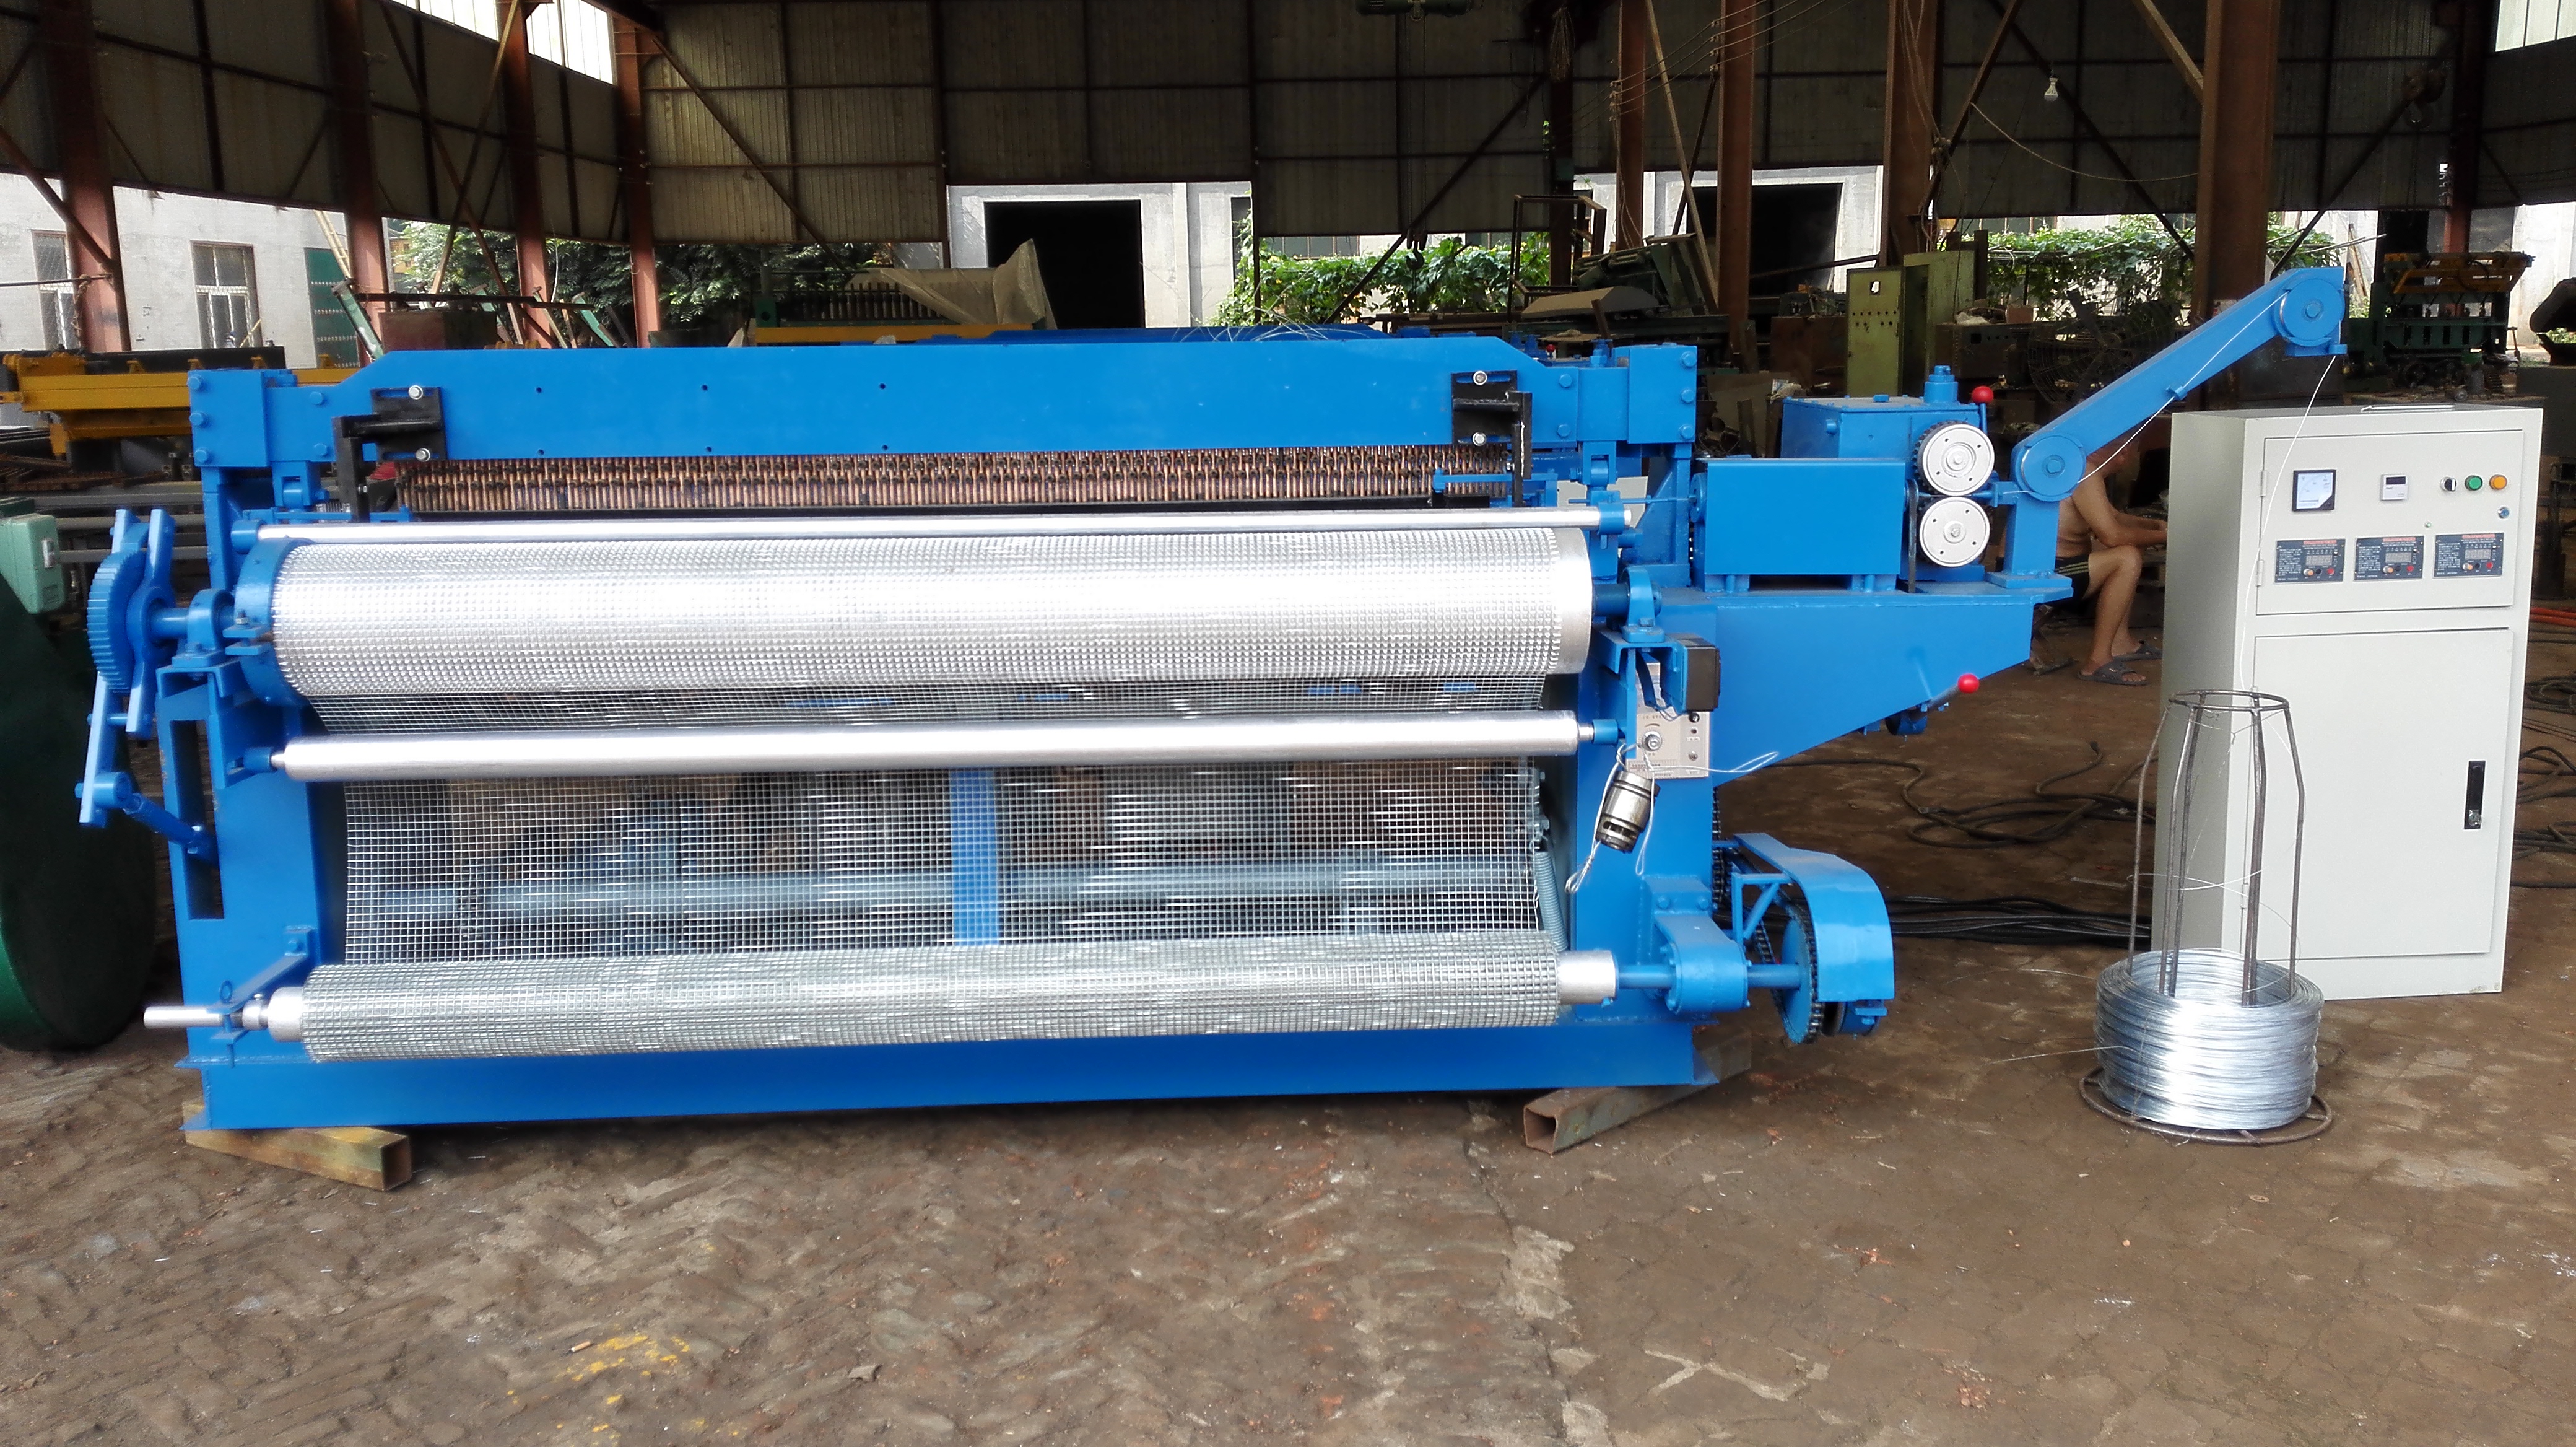 Knowledge of Best Electrowelded mesh machine by feeding straightened rods